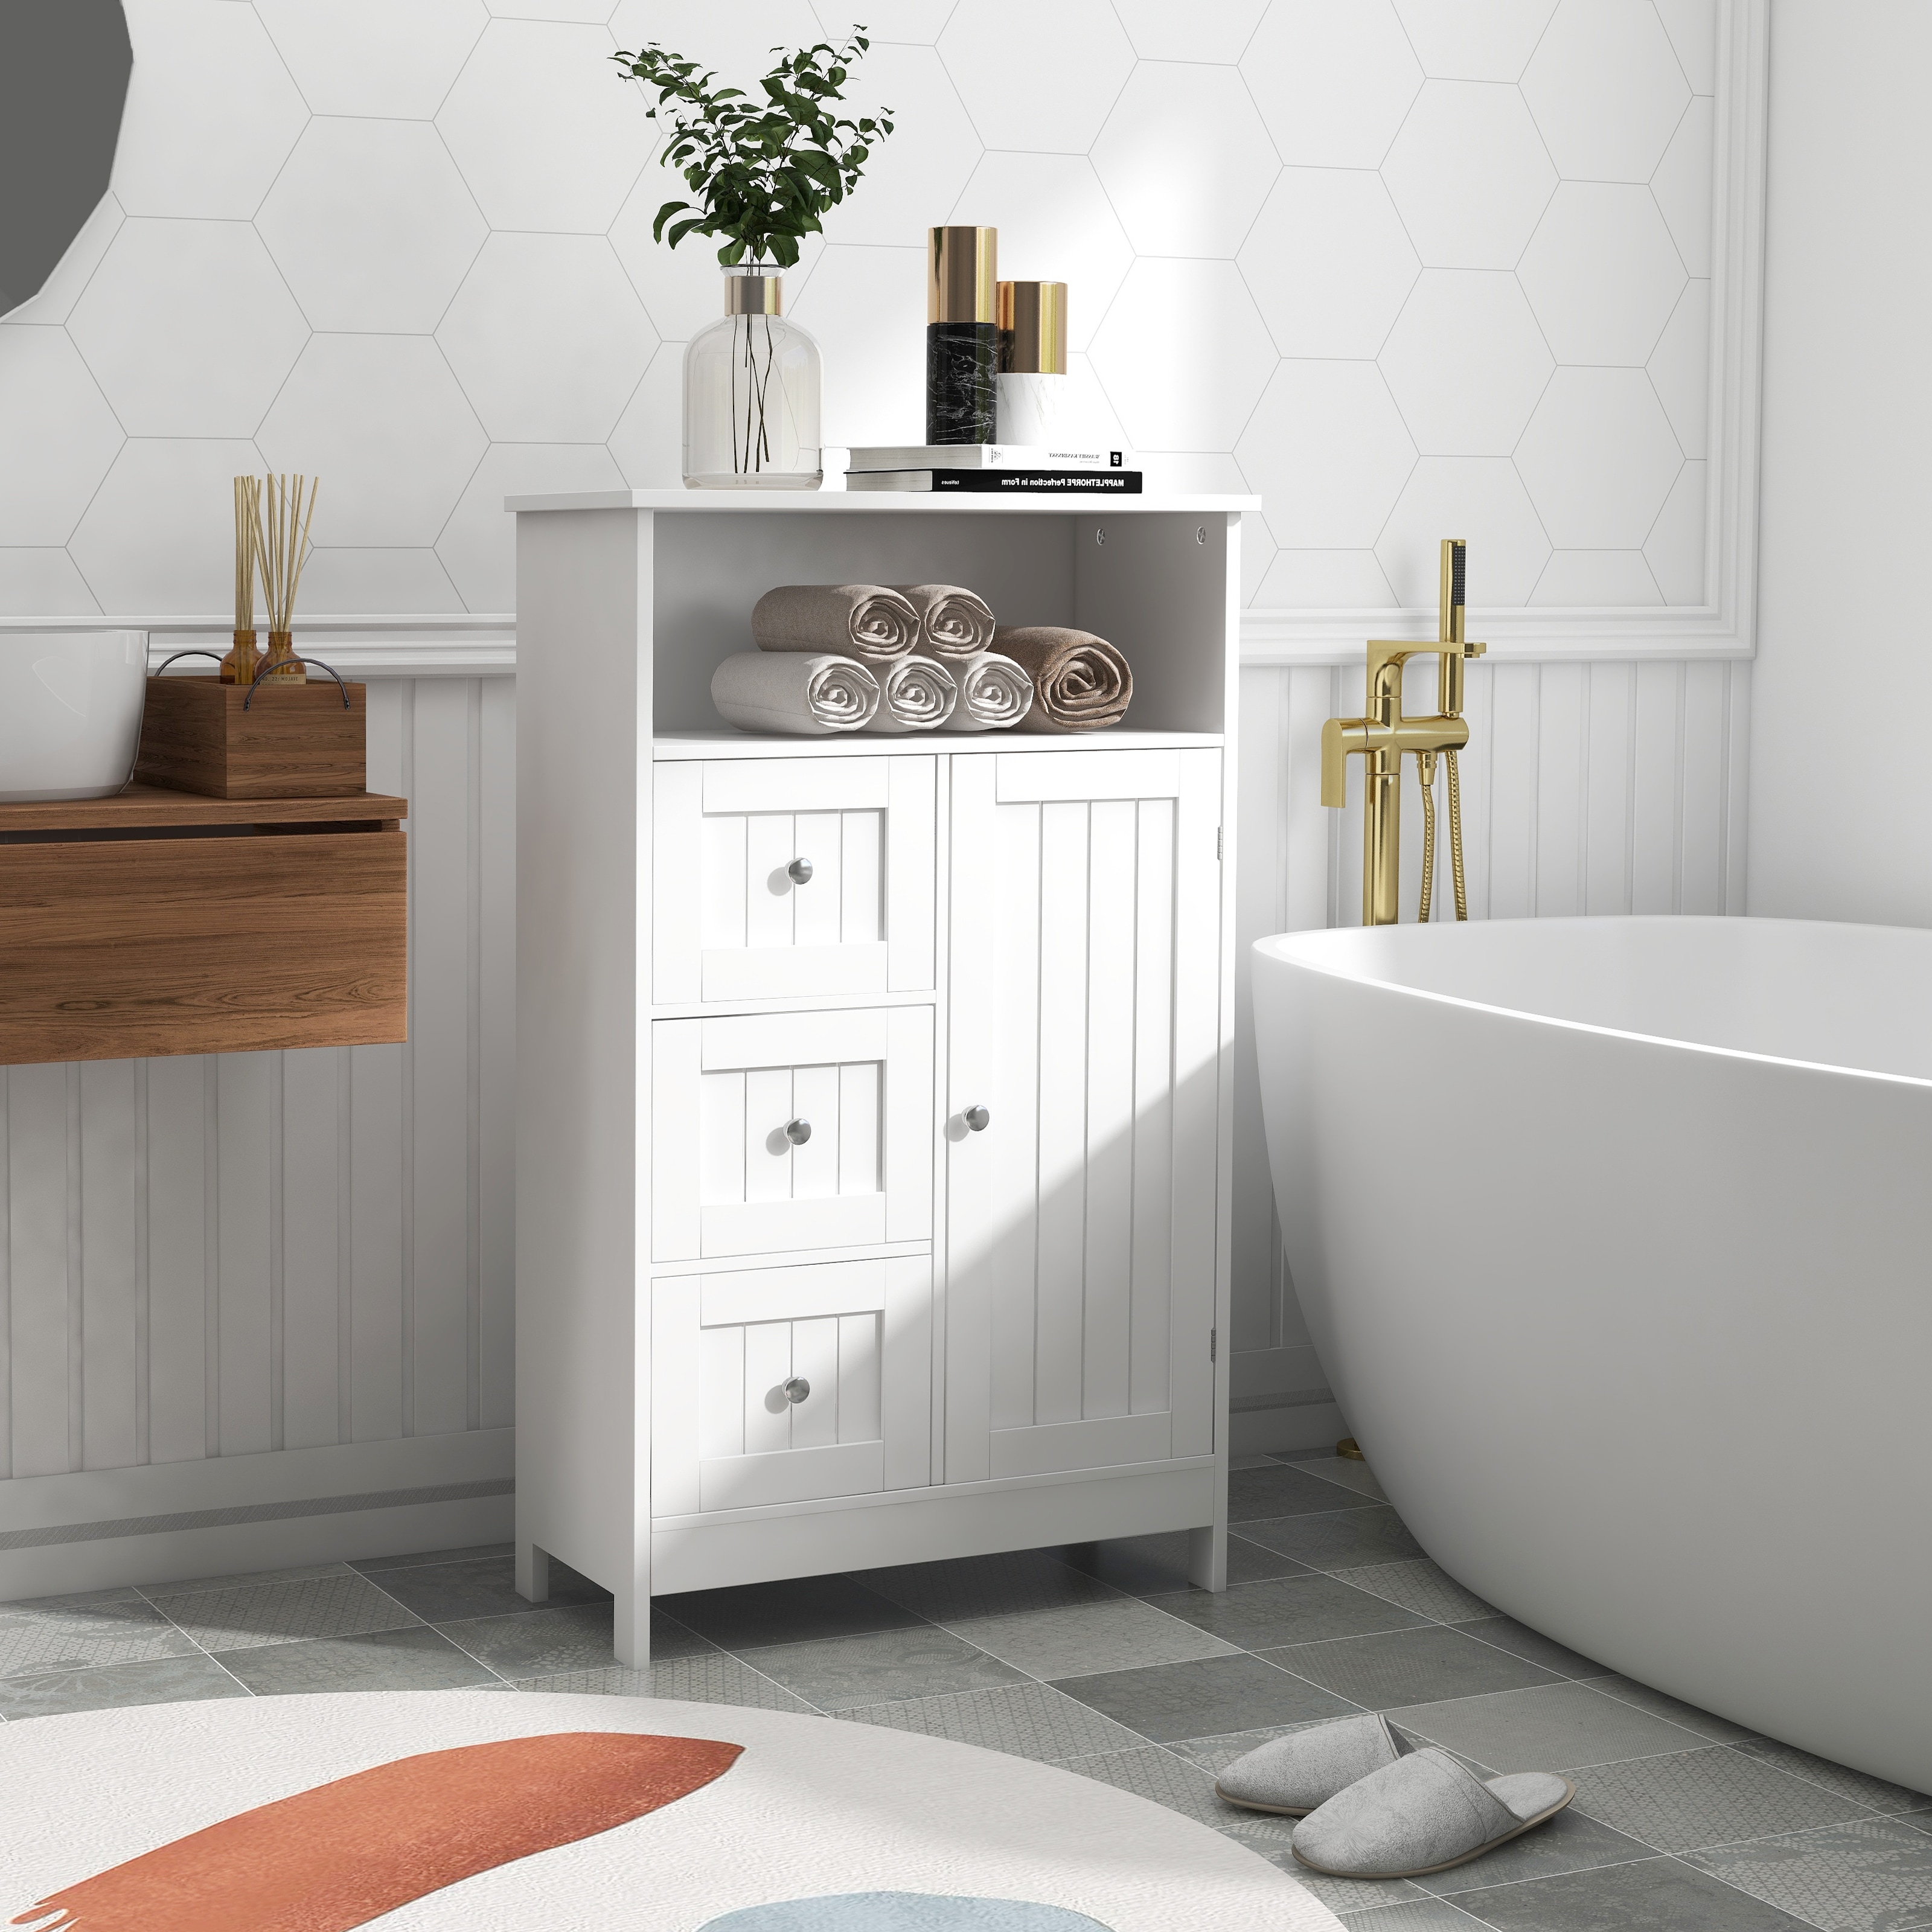 https://ak1.ostkcdn.com/images/products/is/images/direct/9f94ad4dd209d4063547387f64114c115d0ffe4d/White-Bathroom-Standing-3-Drawers-Storage-Cabinet.jpg